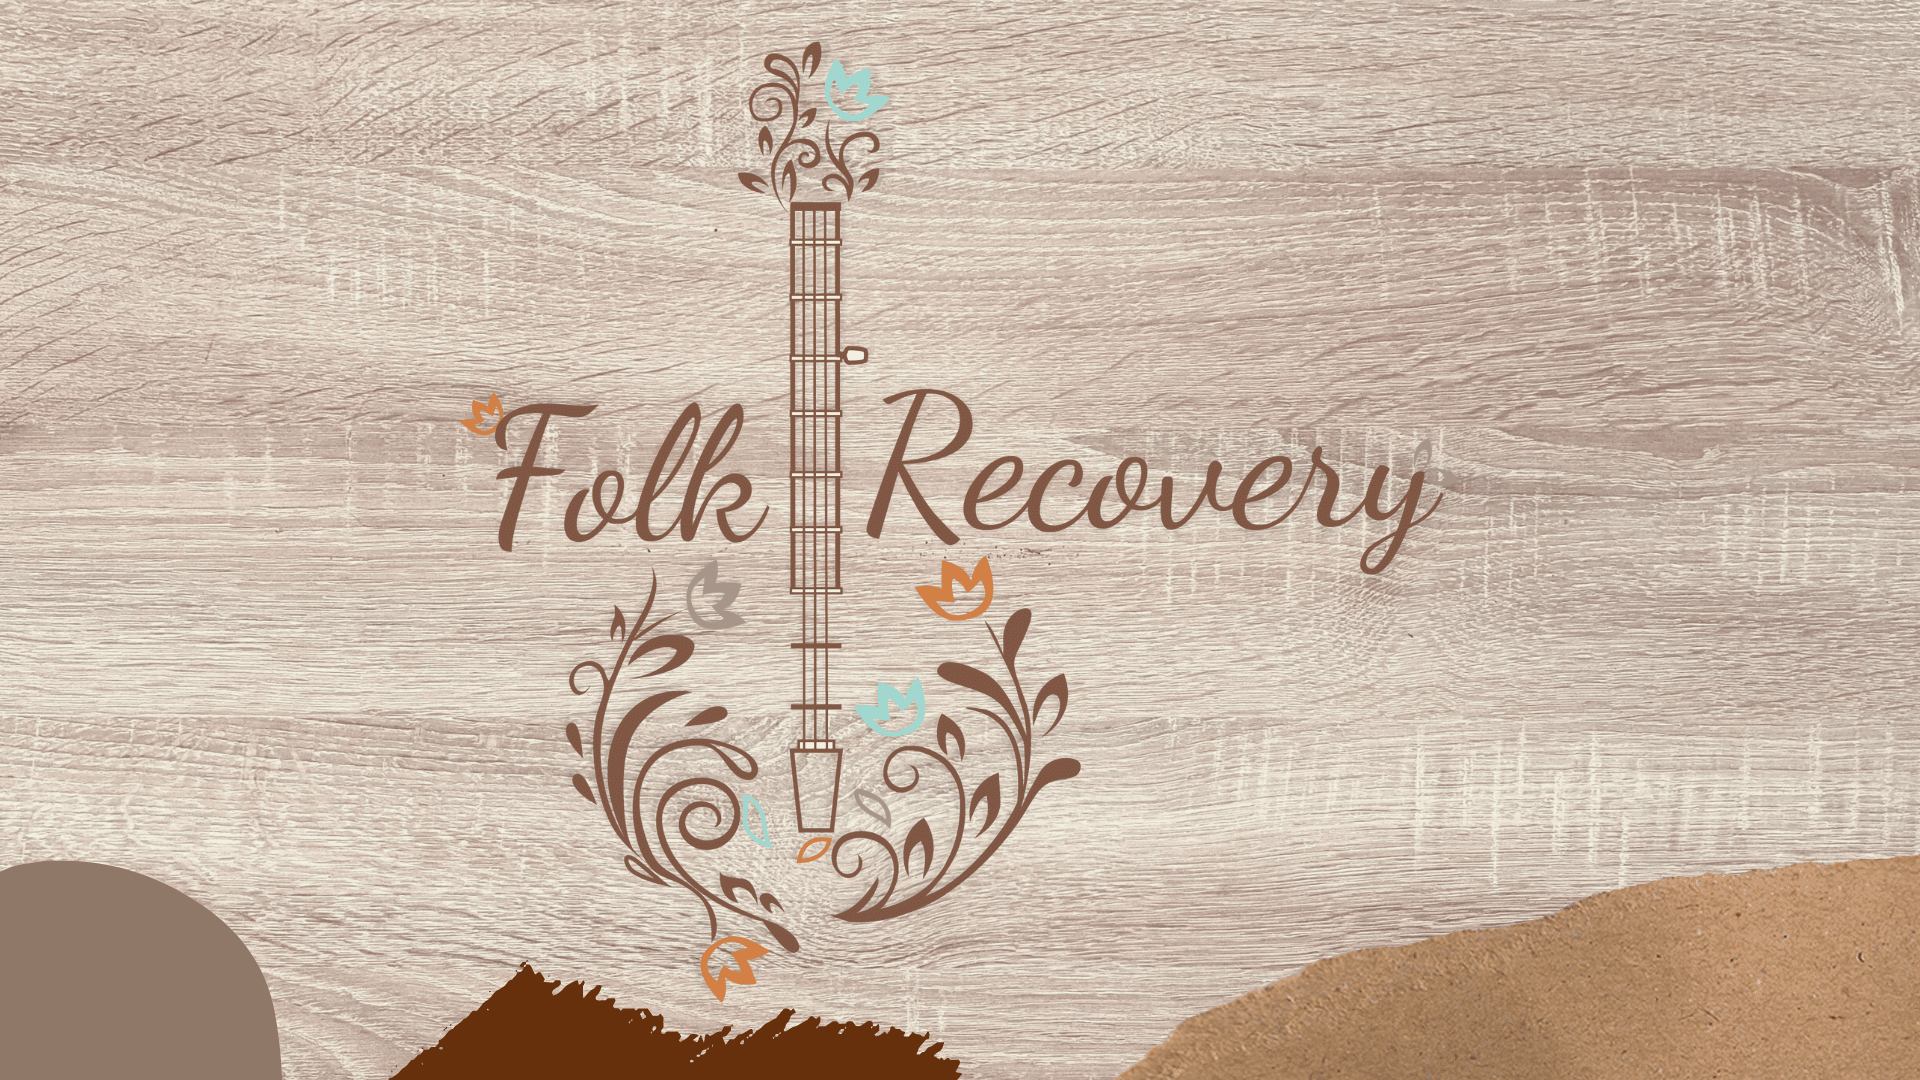 Folk Recovery logo. There is a banjo with flower embellishments between the text